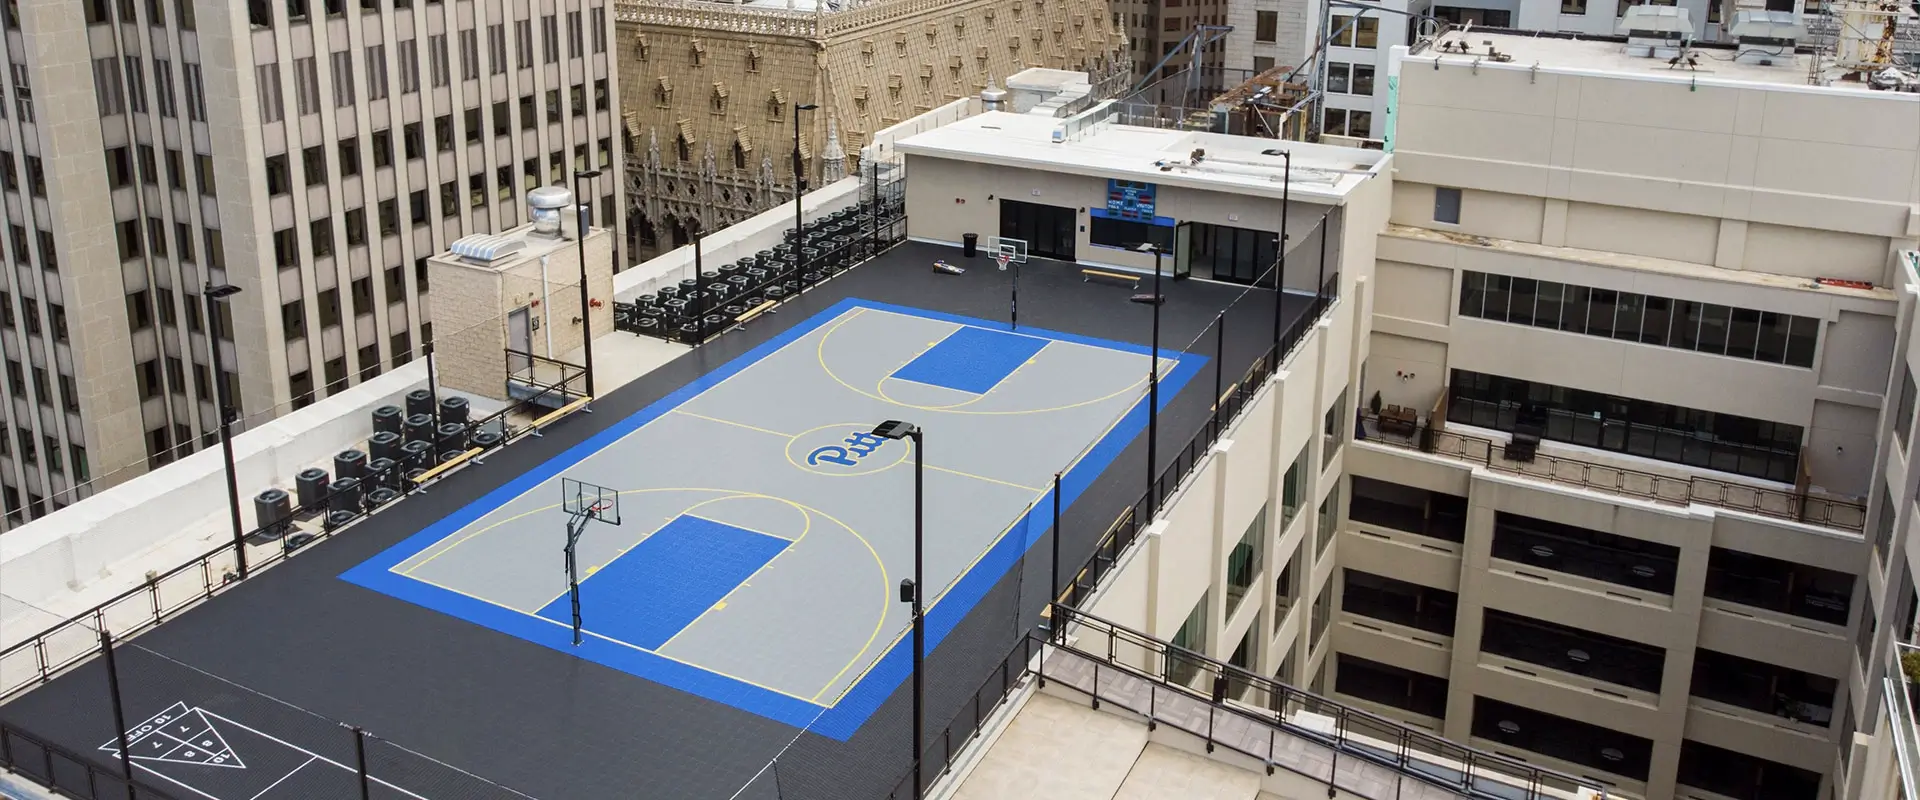 rooftop court in Pittsburgh